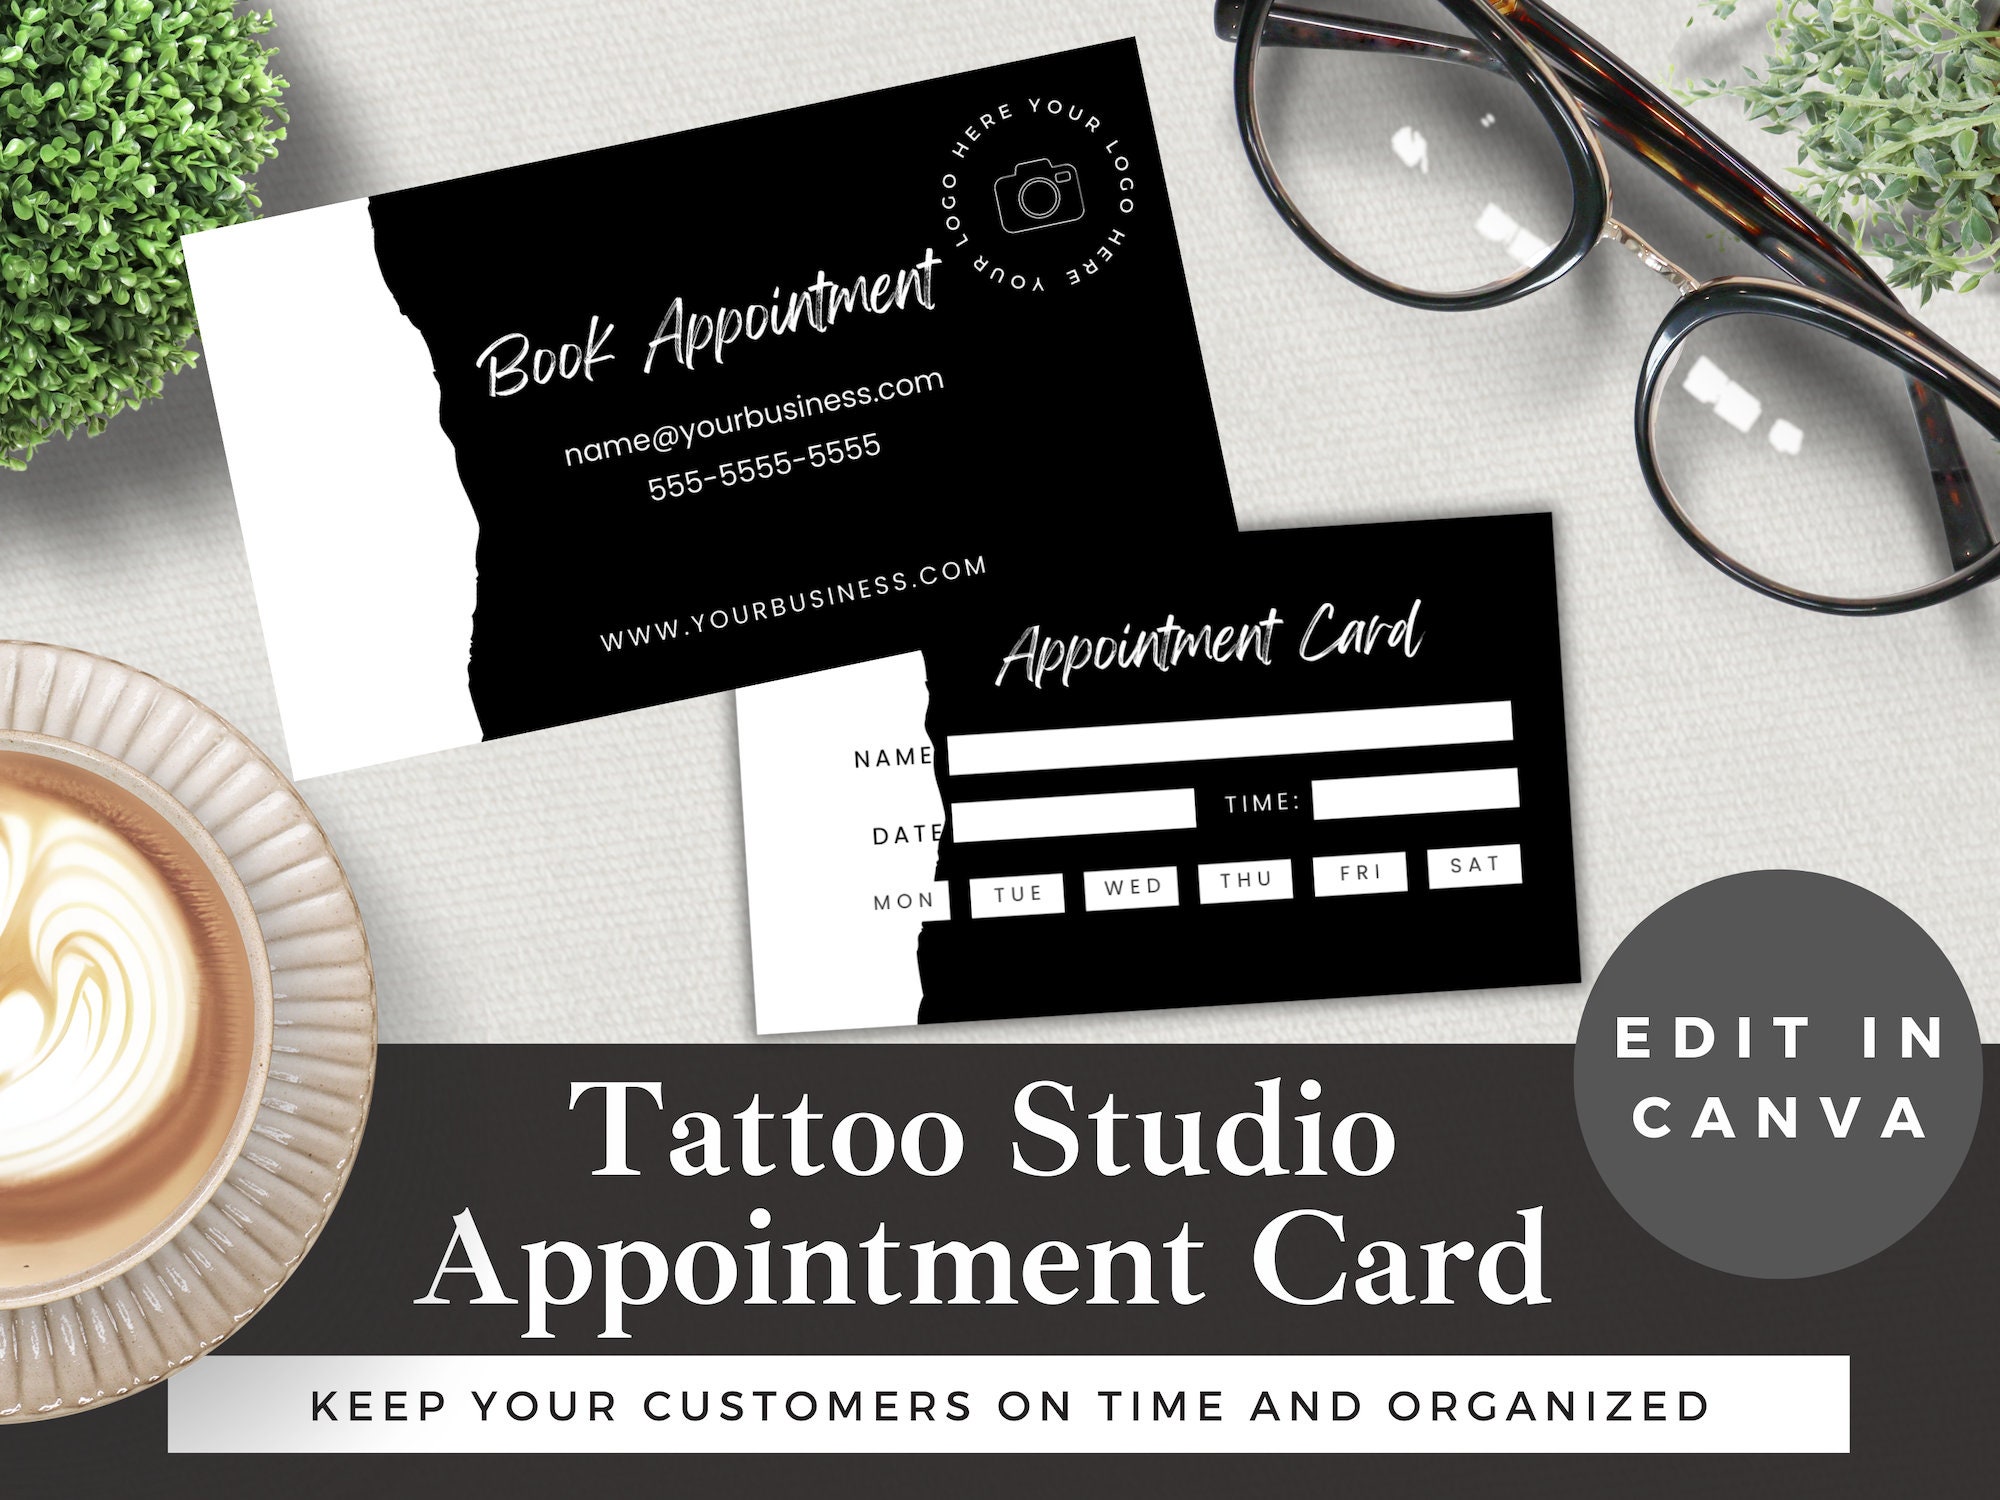 Appointment Card designs themes templates and downloadable graphic  elements on Dribbble